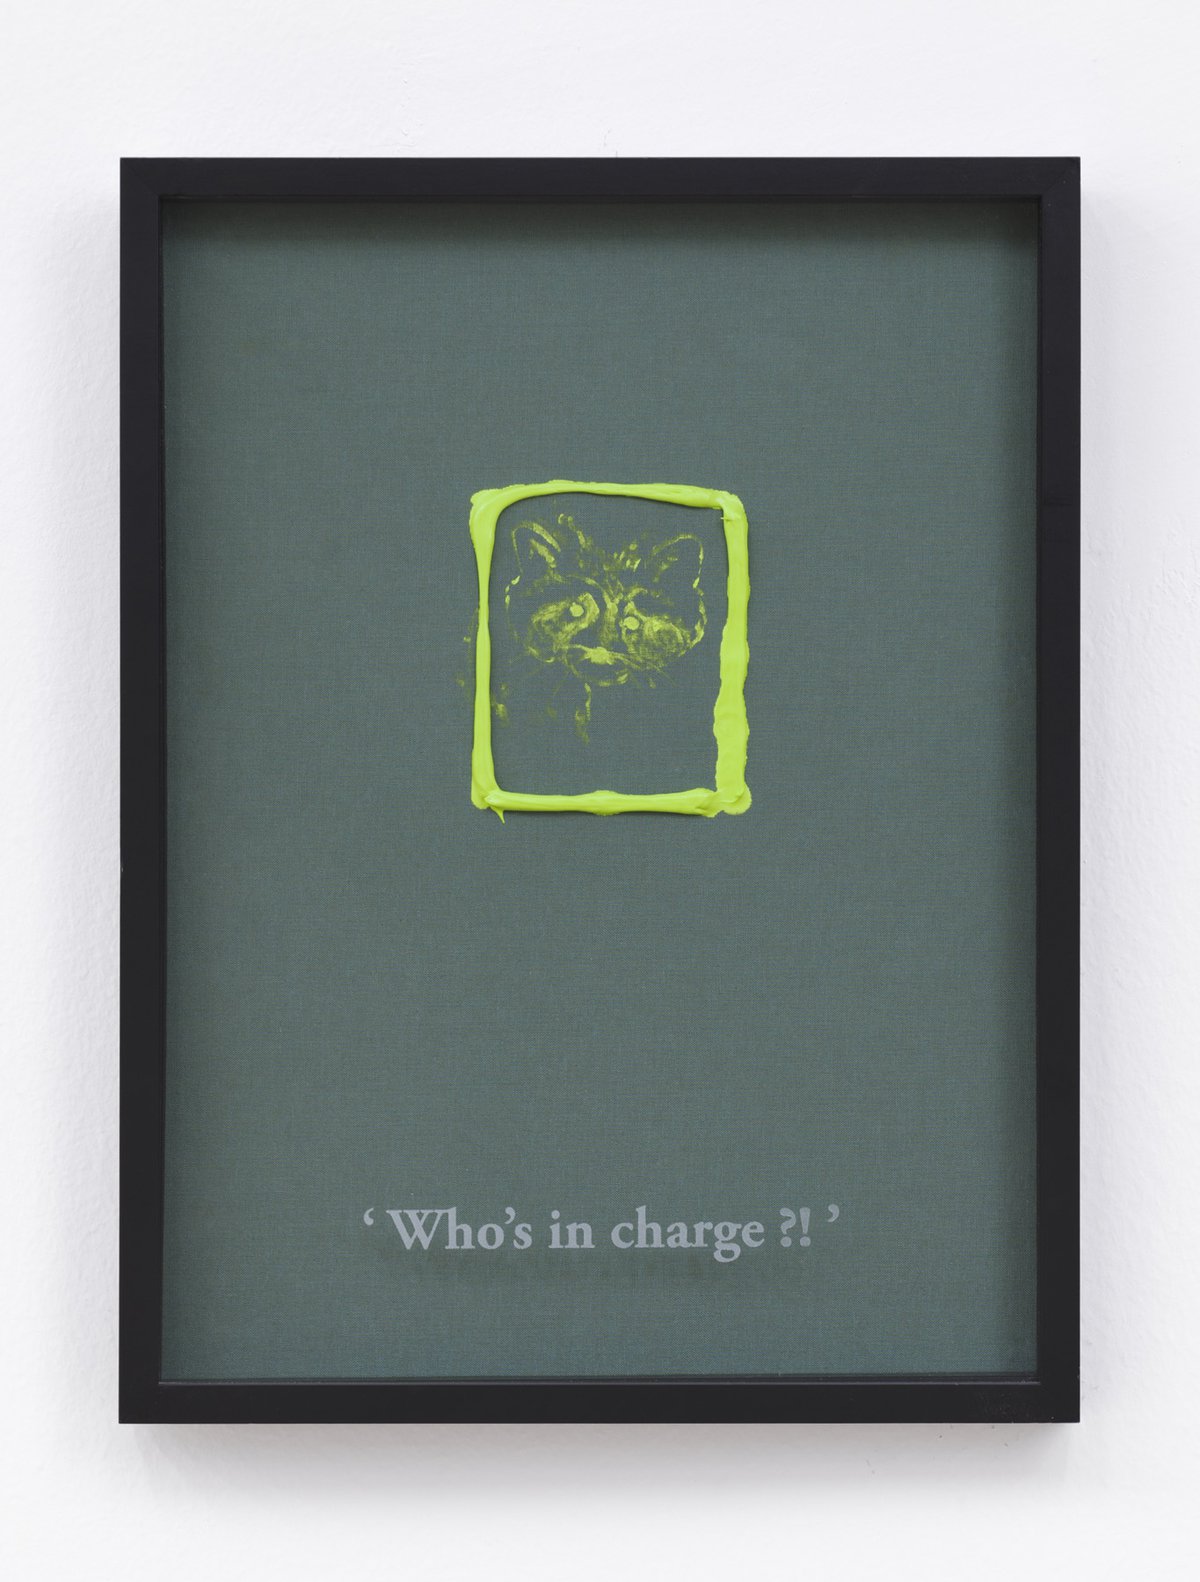 Philipp Timischl&quot;Who&#x27;s in charge?!&quot; (Green/Brilliant Yellow Green), 2017Acrylic on linen and glass-engraved object frame40.1 x 32.1 cm